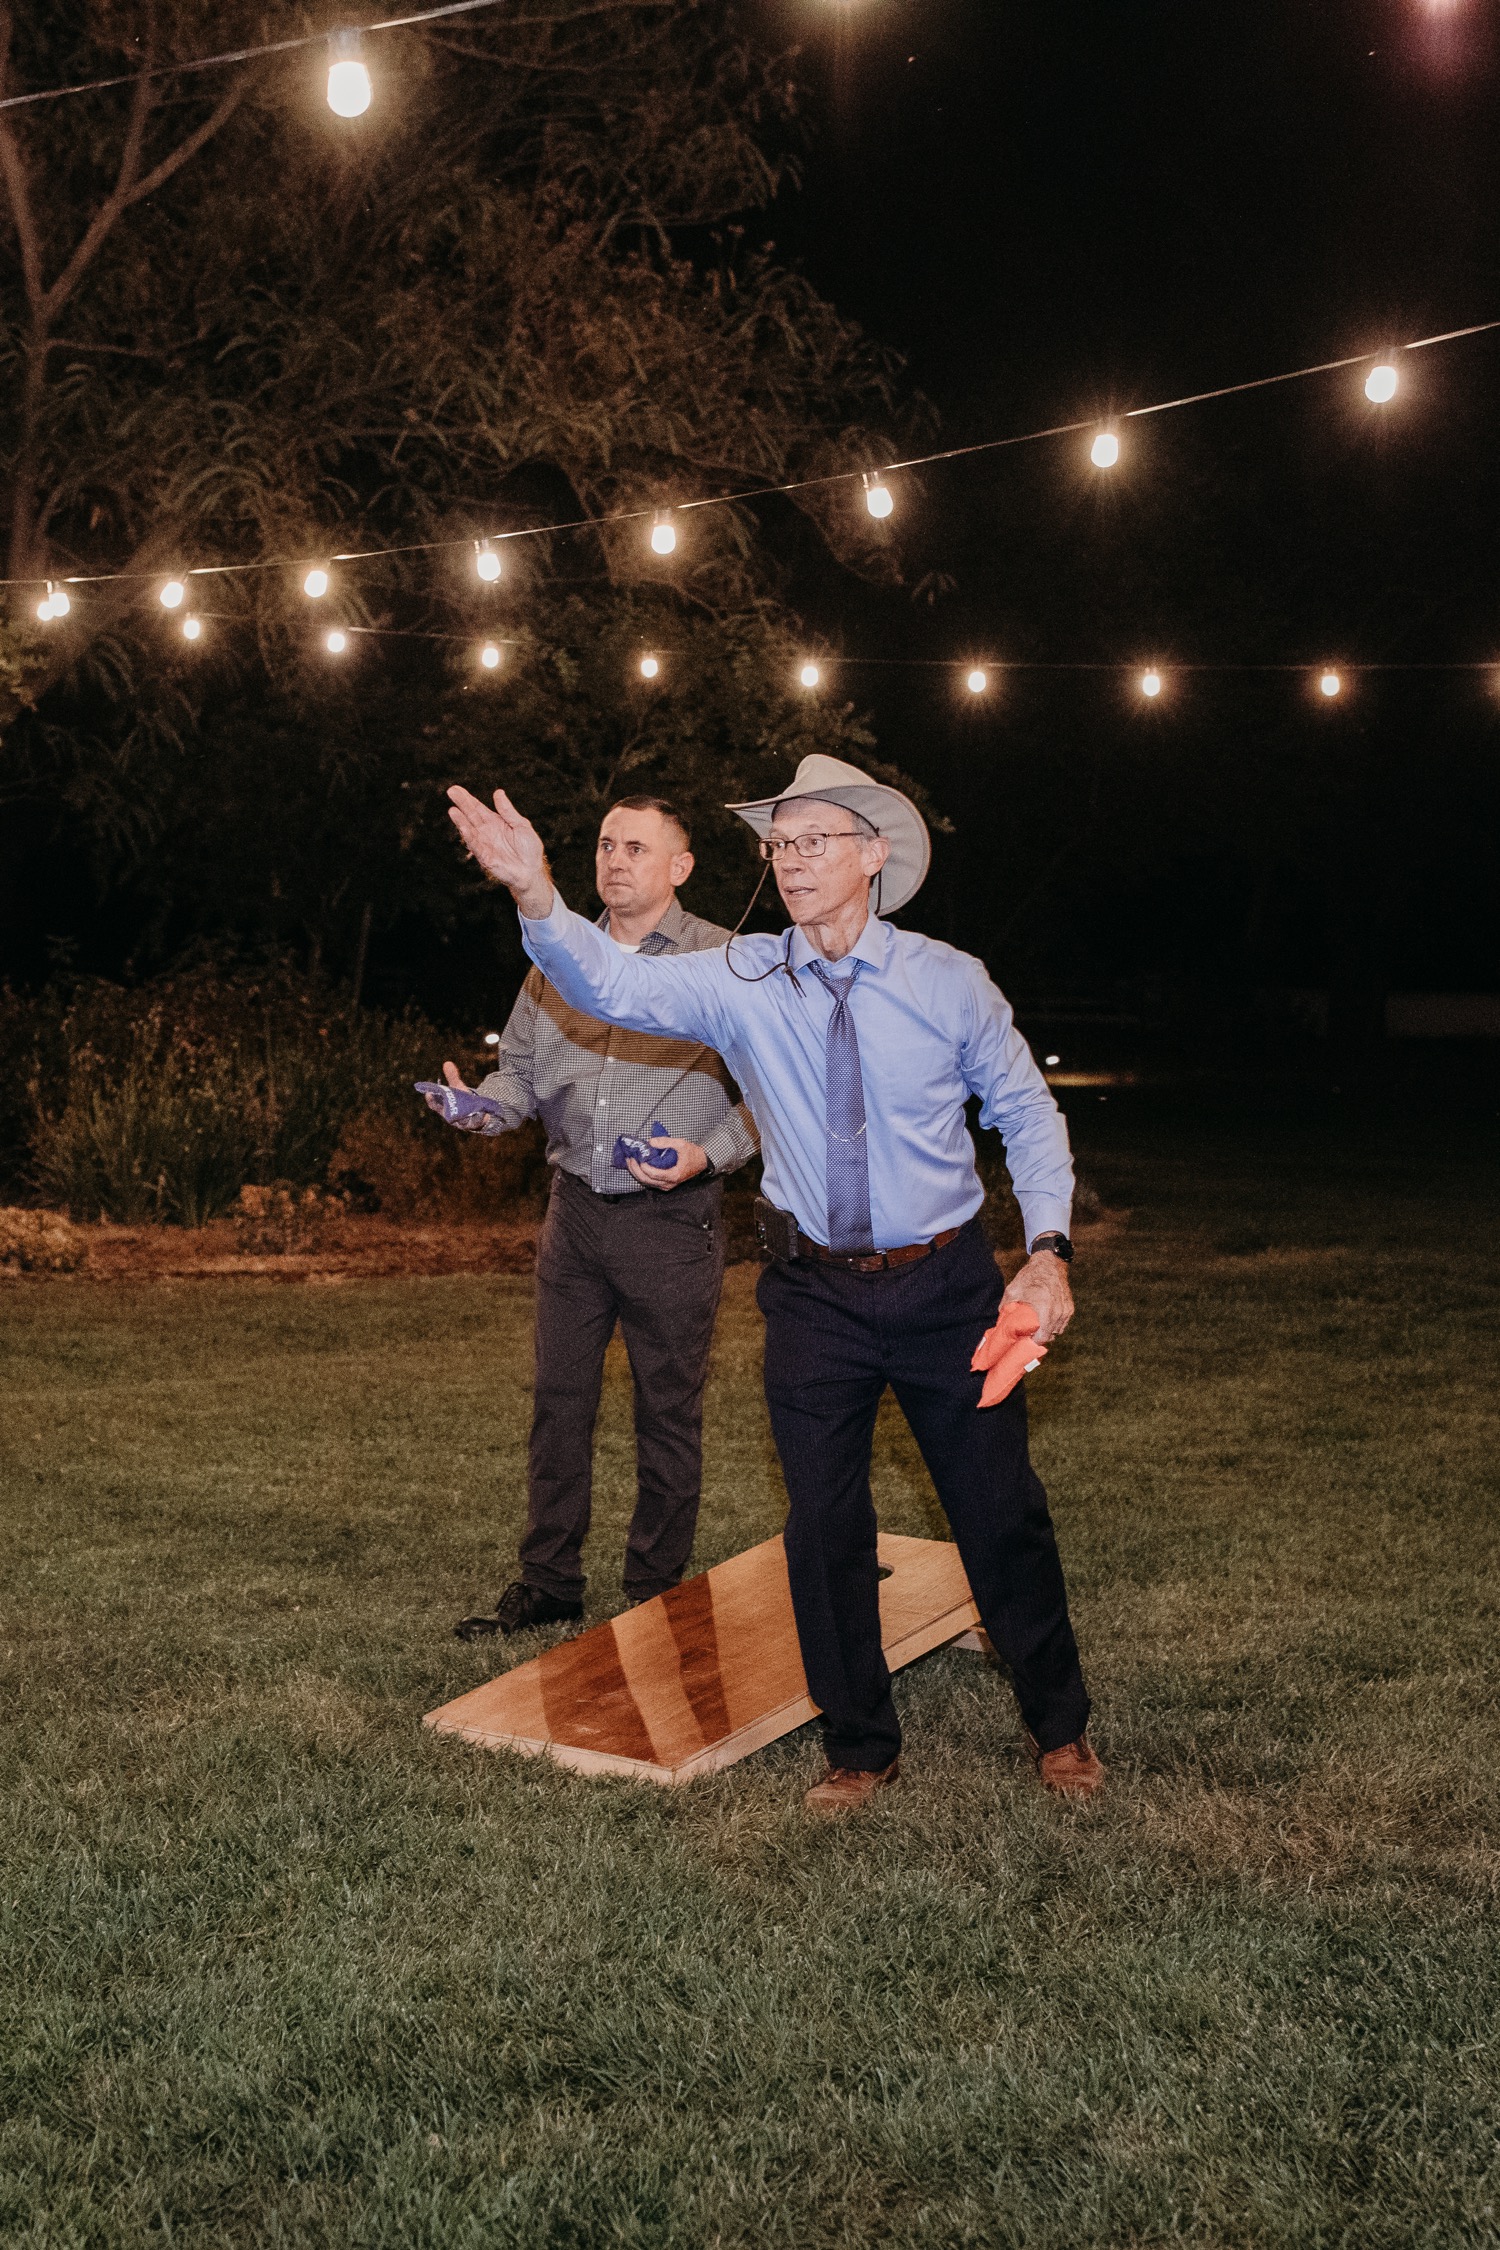 Guests play corn hole under the lights at Alayna and Trey's wedding at The Maples in Woodland, CA